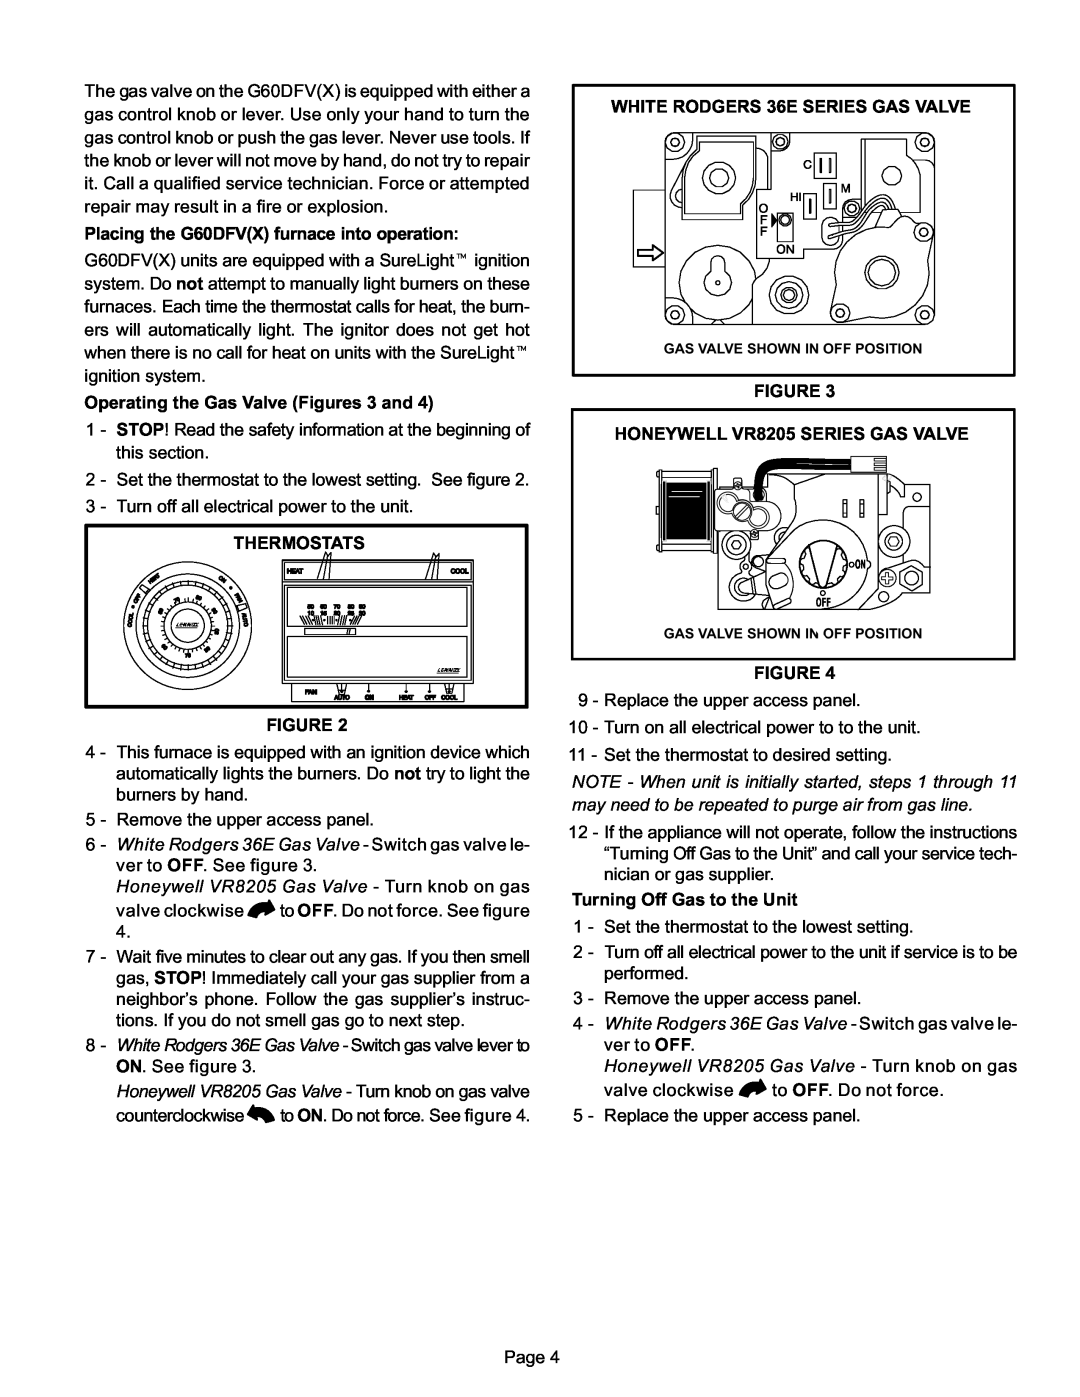 Lenoxx Electronics G60DFV(X) manual Operating the Gas Valve Figures 3 and 